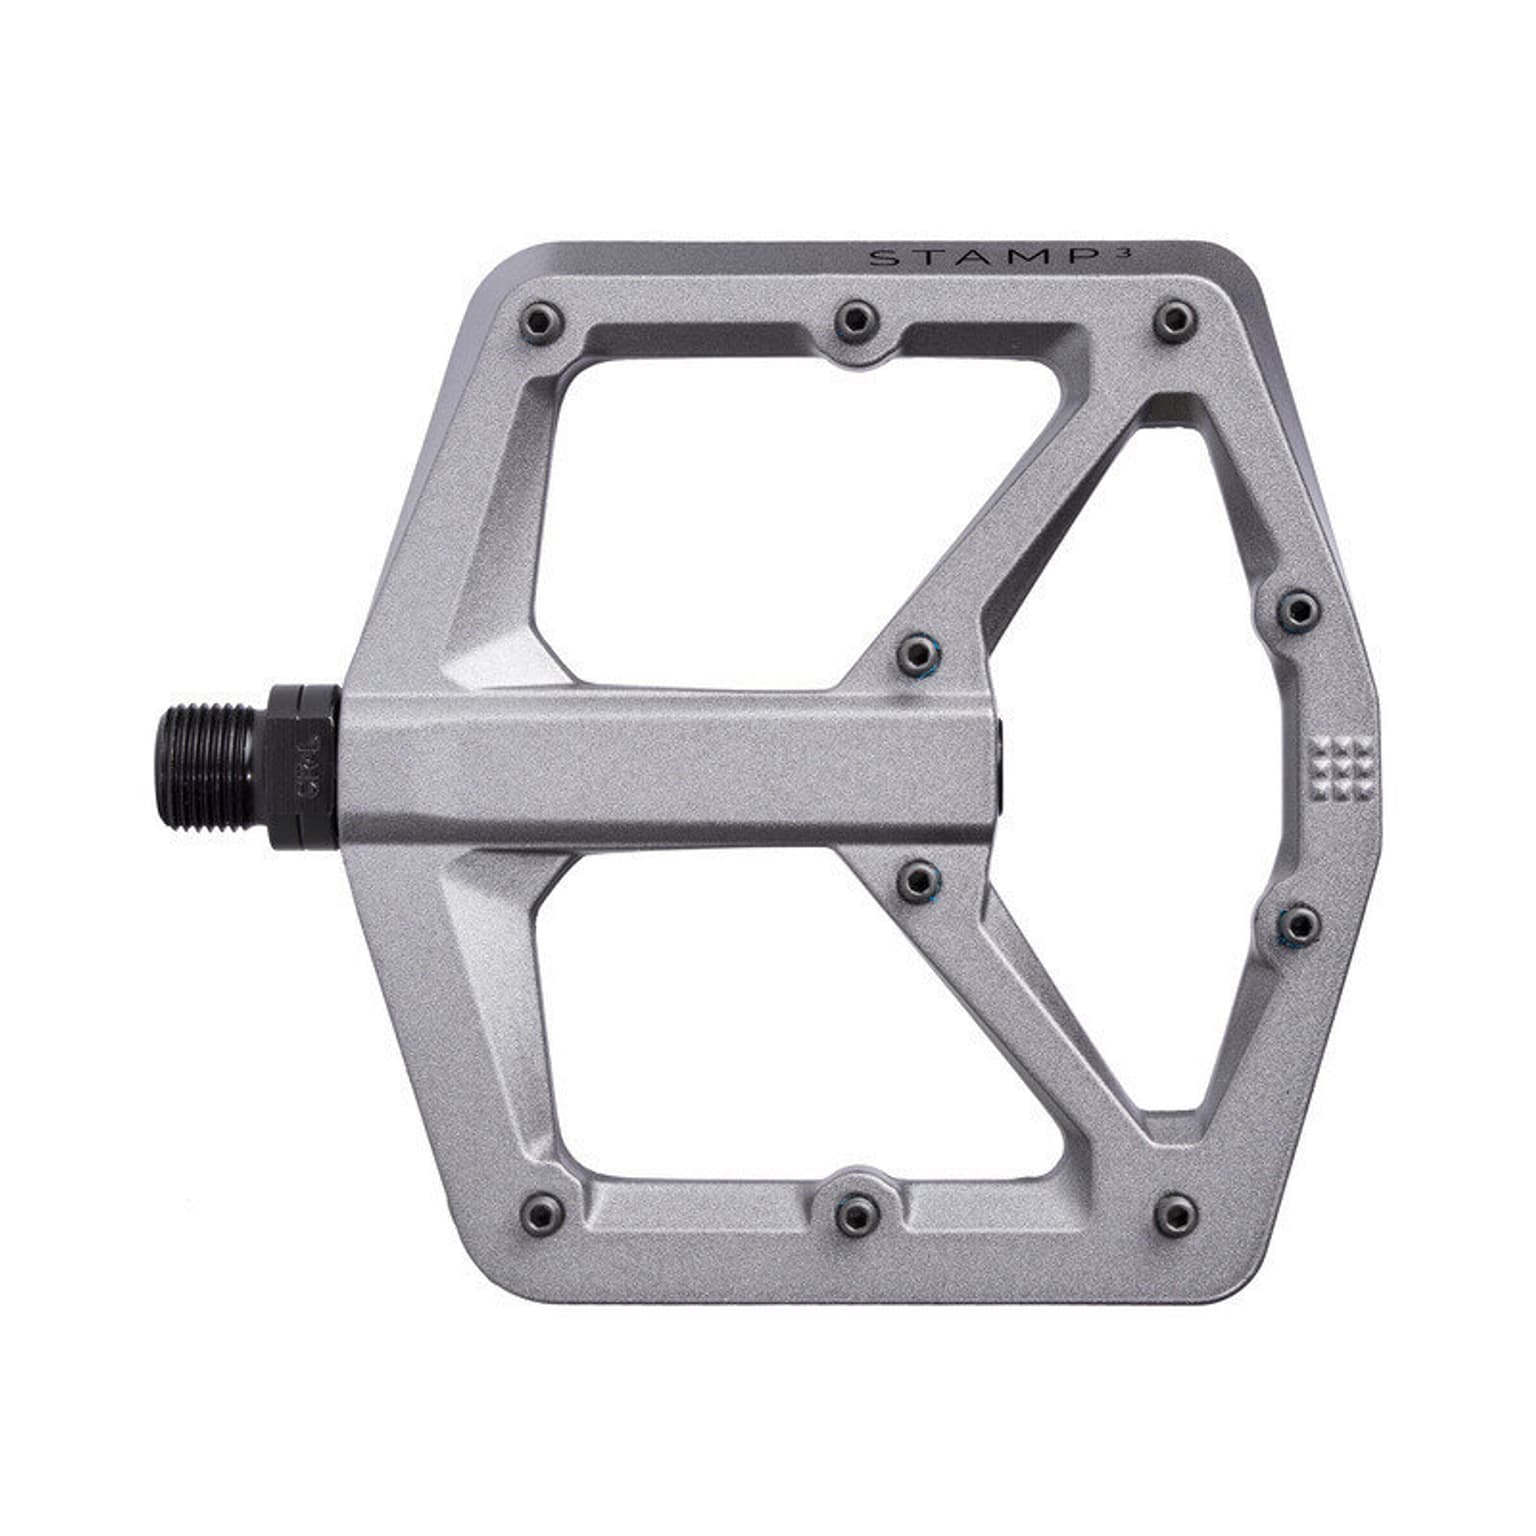 crankbrothers crankbrothers Pedal Stamp 3 large Pedale 1